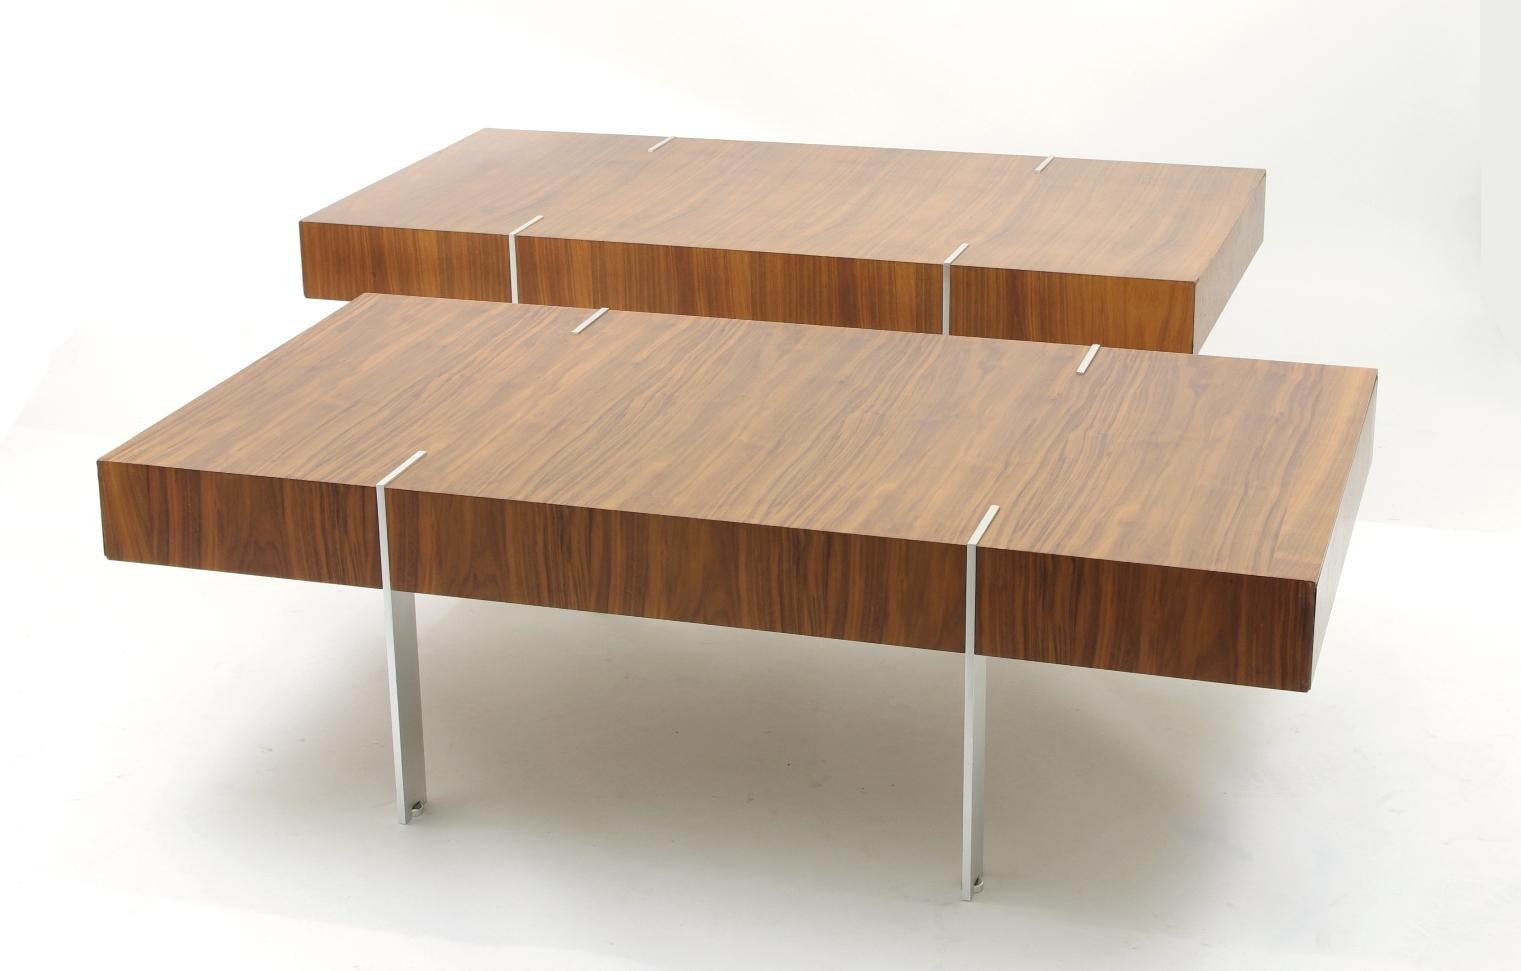 Pair of modernist walnut coffee tables, each with bookmatched veneer; the ends with concealed drawers; the plated legs with adjustable disc feet.